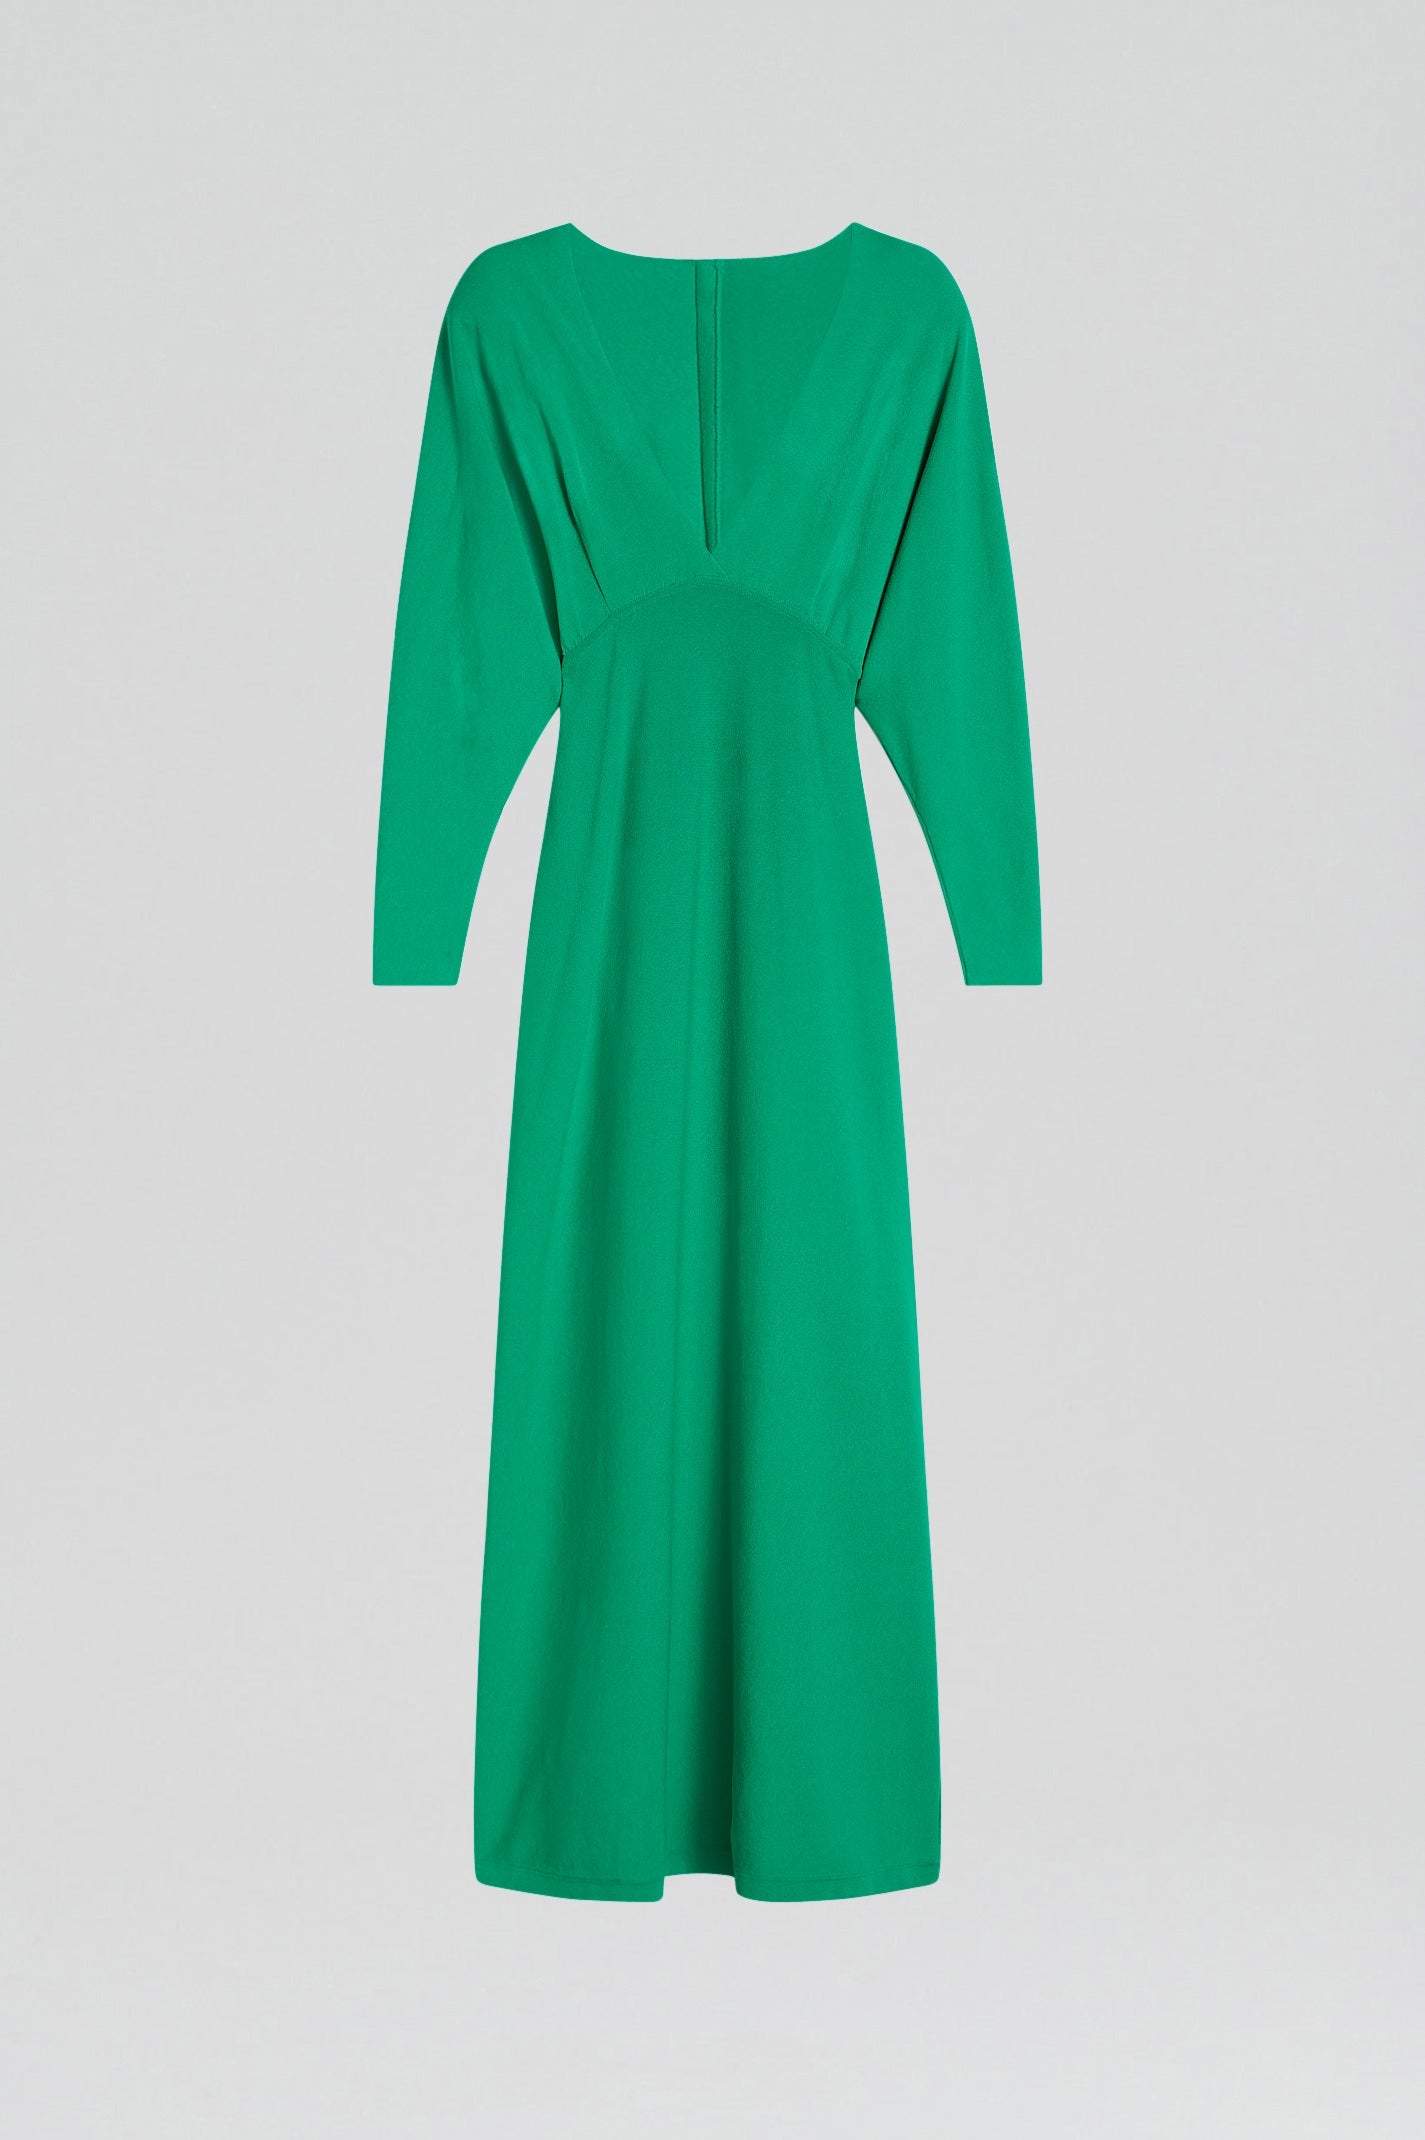 CREPE KNIT DOLMAN SLEEVE GOWN - GREEN